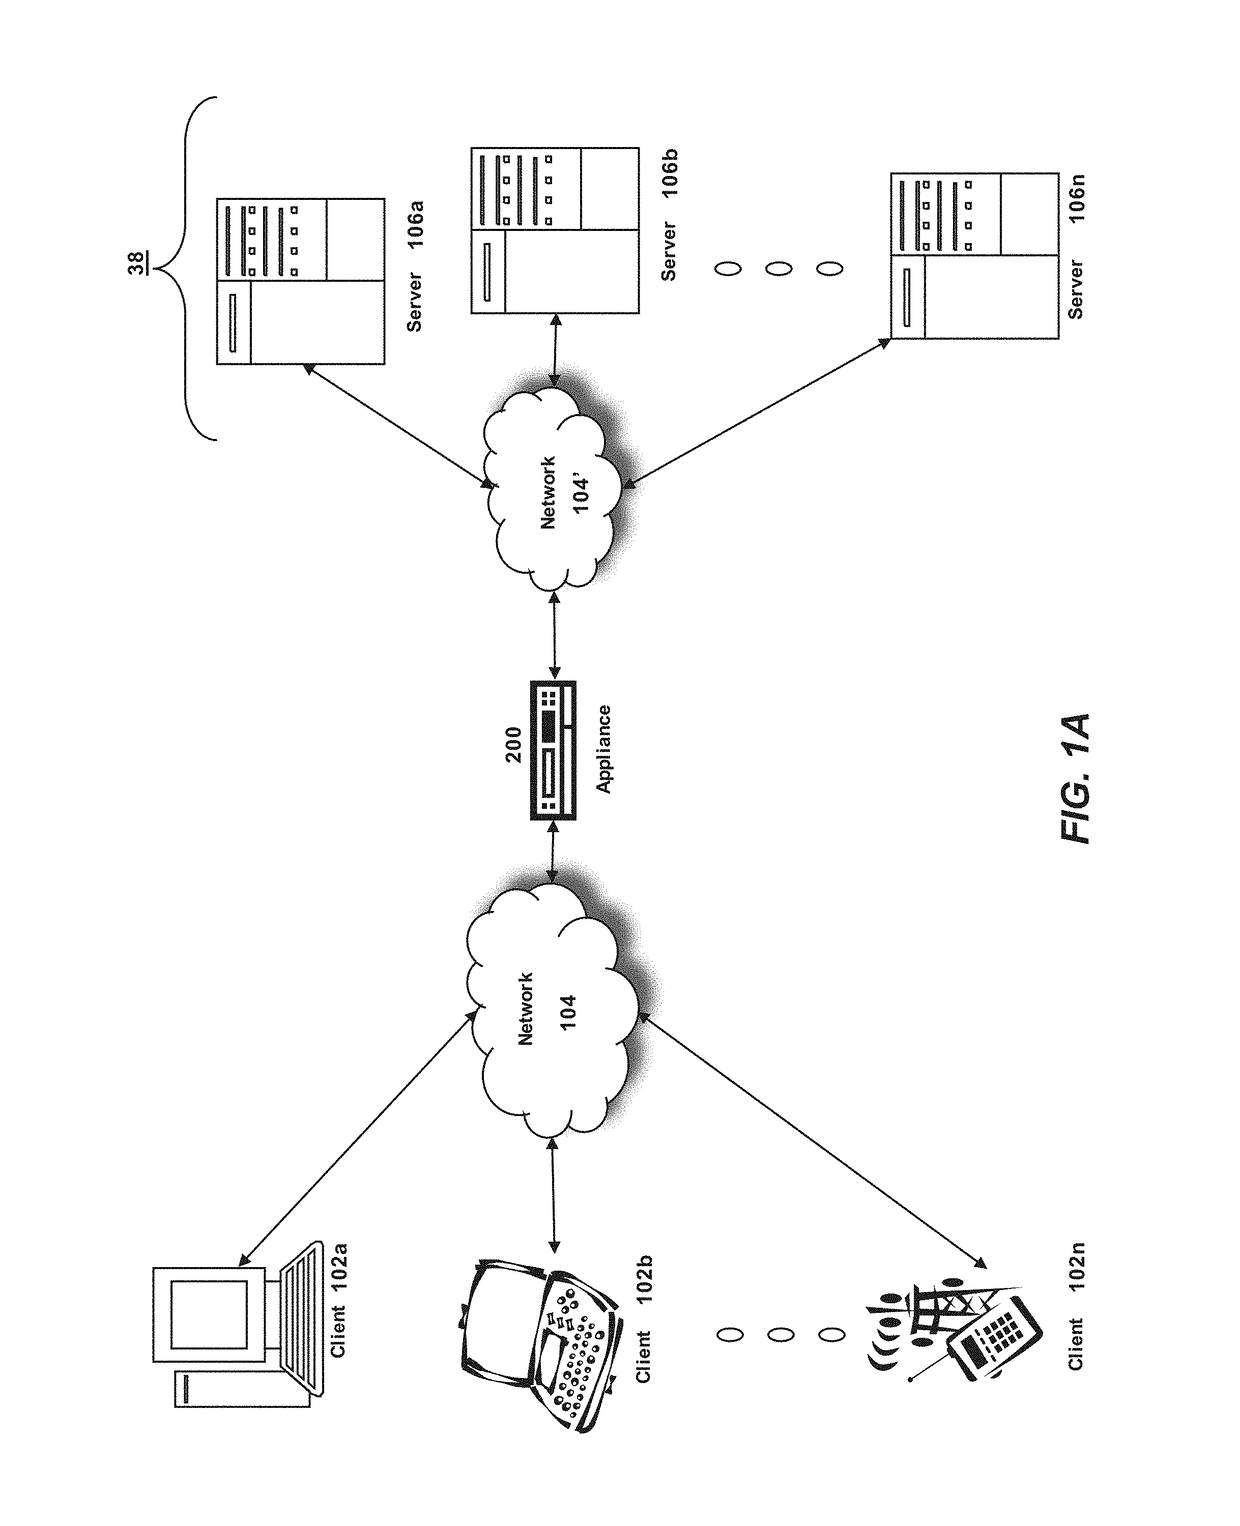 Method to remap high priority connection with large congestion window to high latency link to achieve better performance